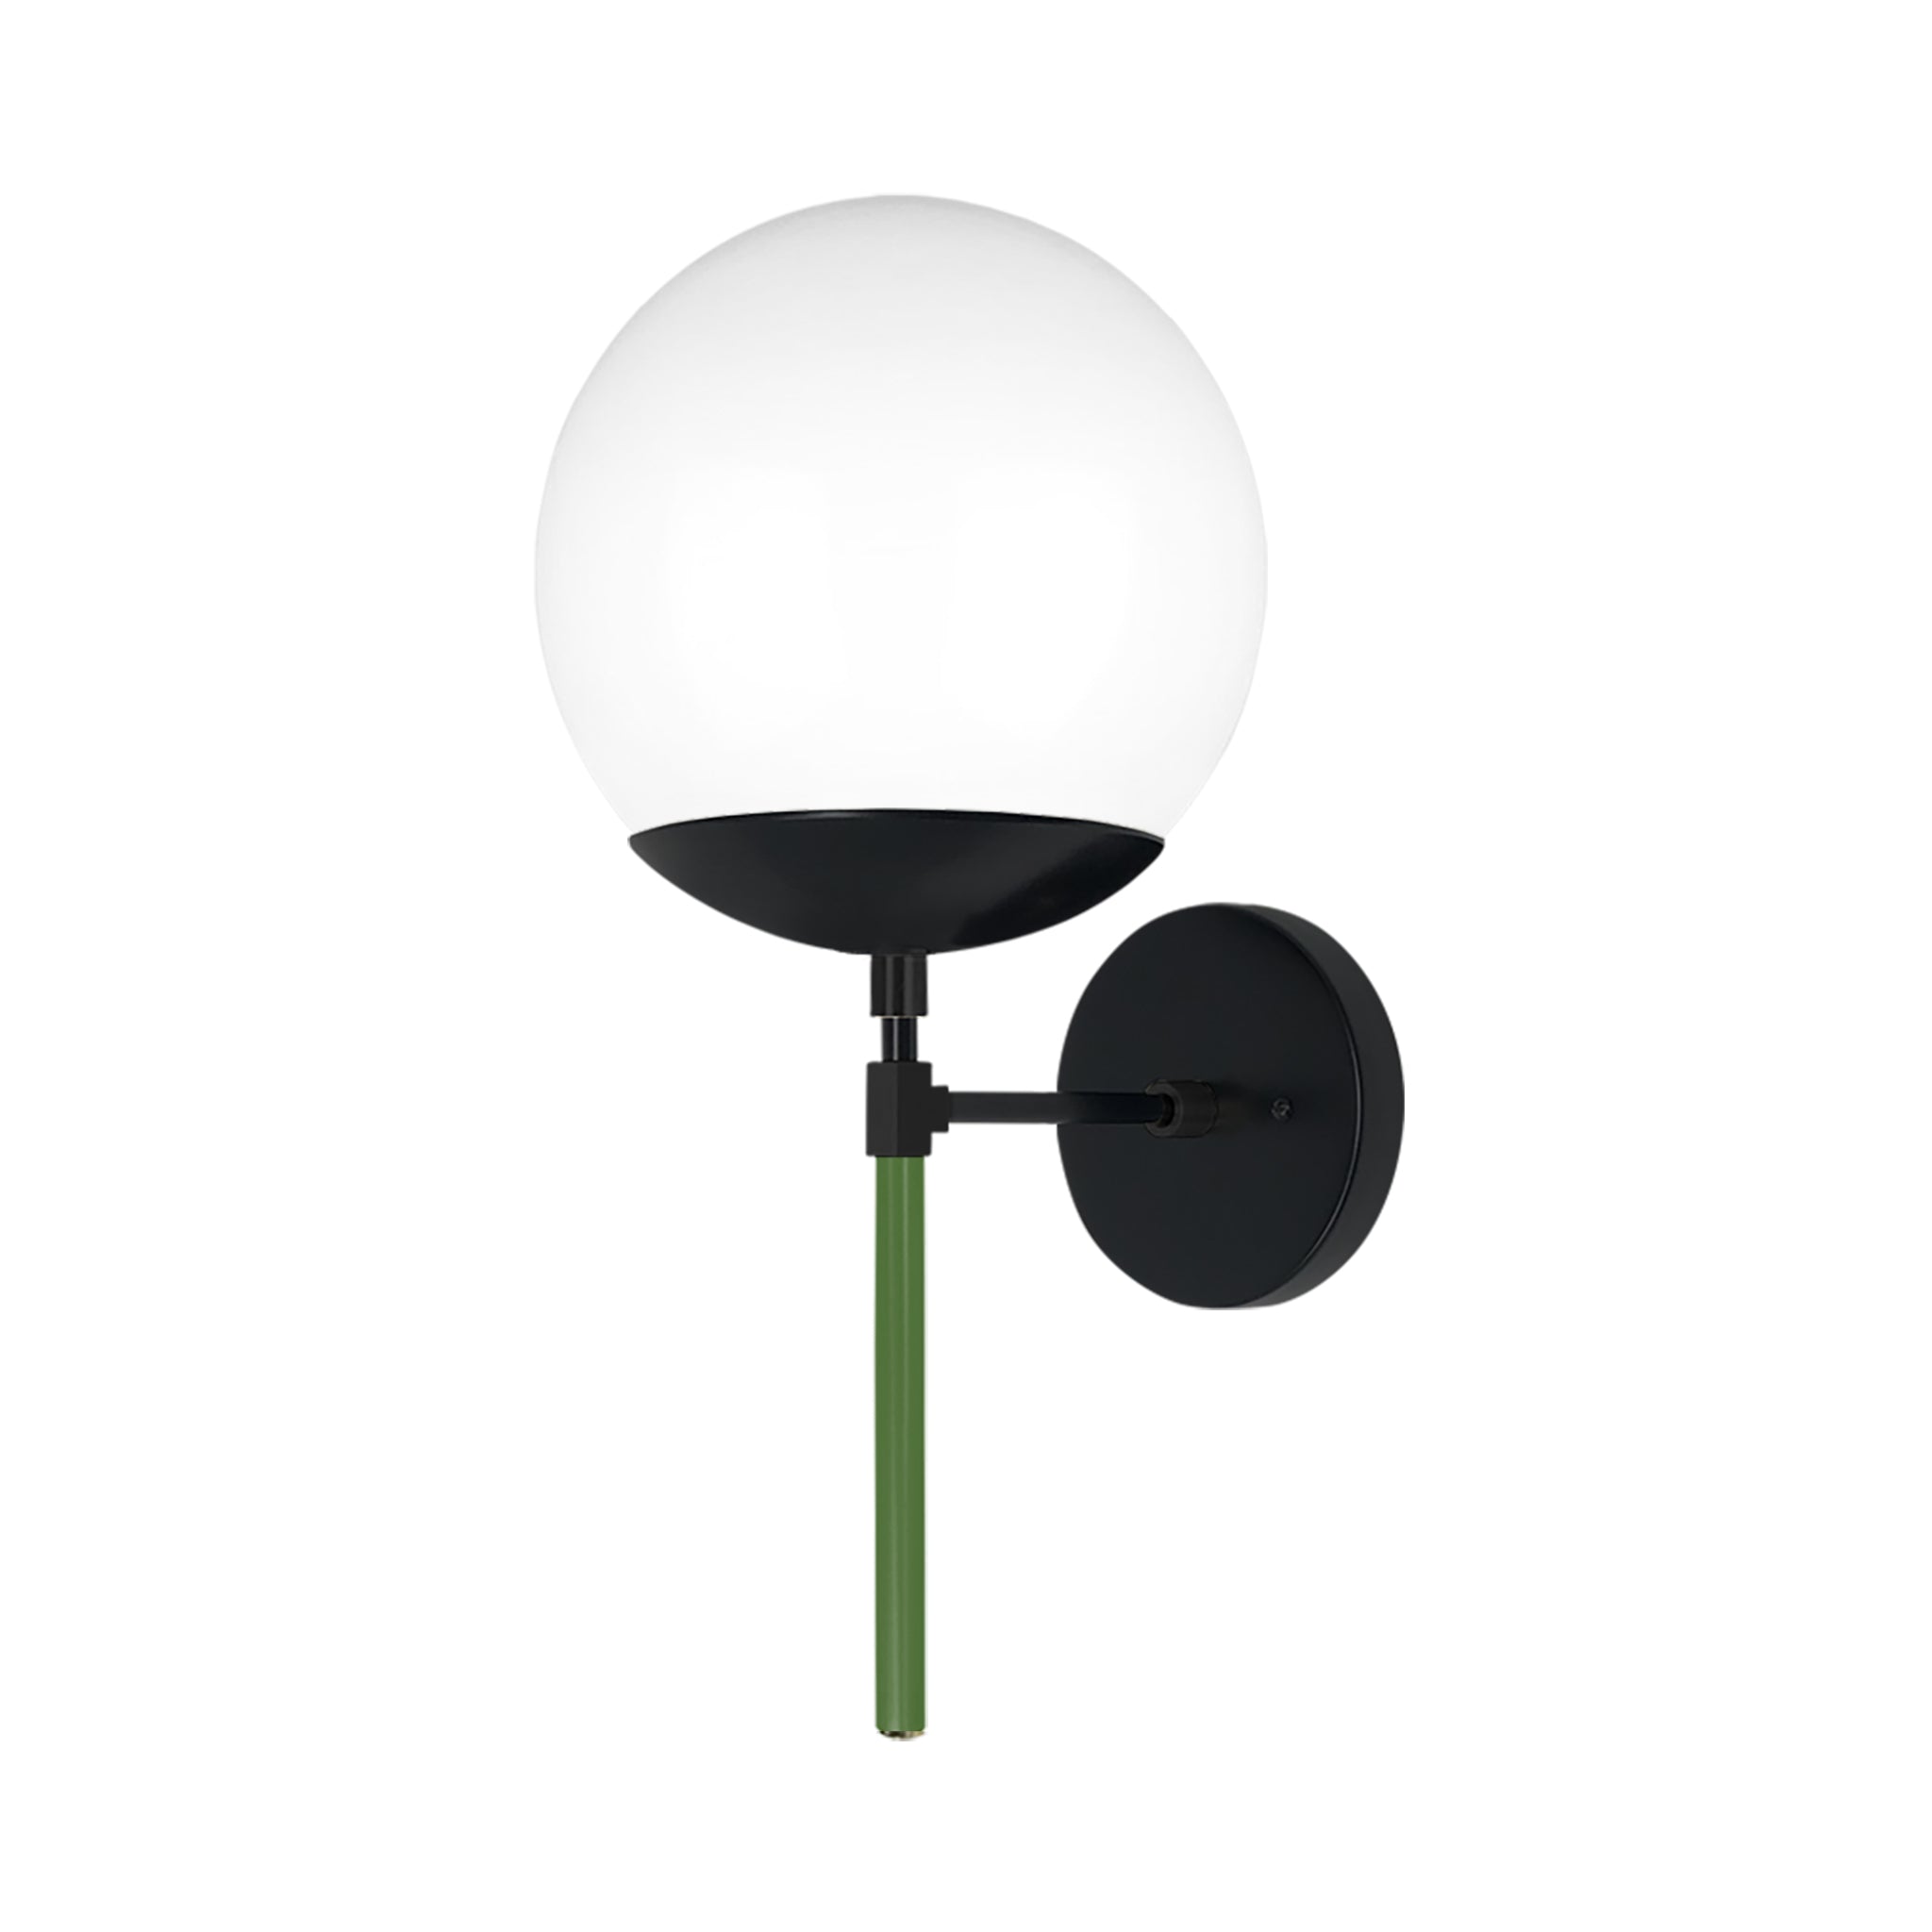 Black and python green color Lolli sconce 8" Dutton Brown lighting